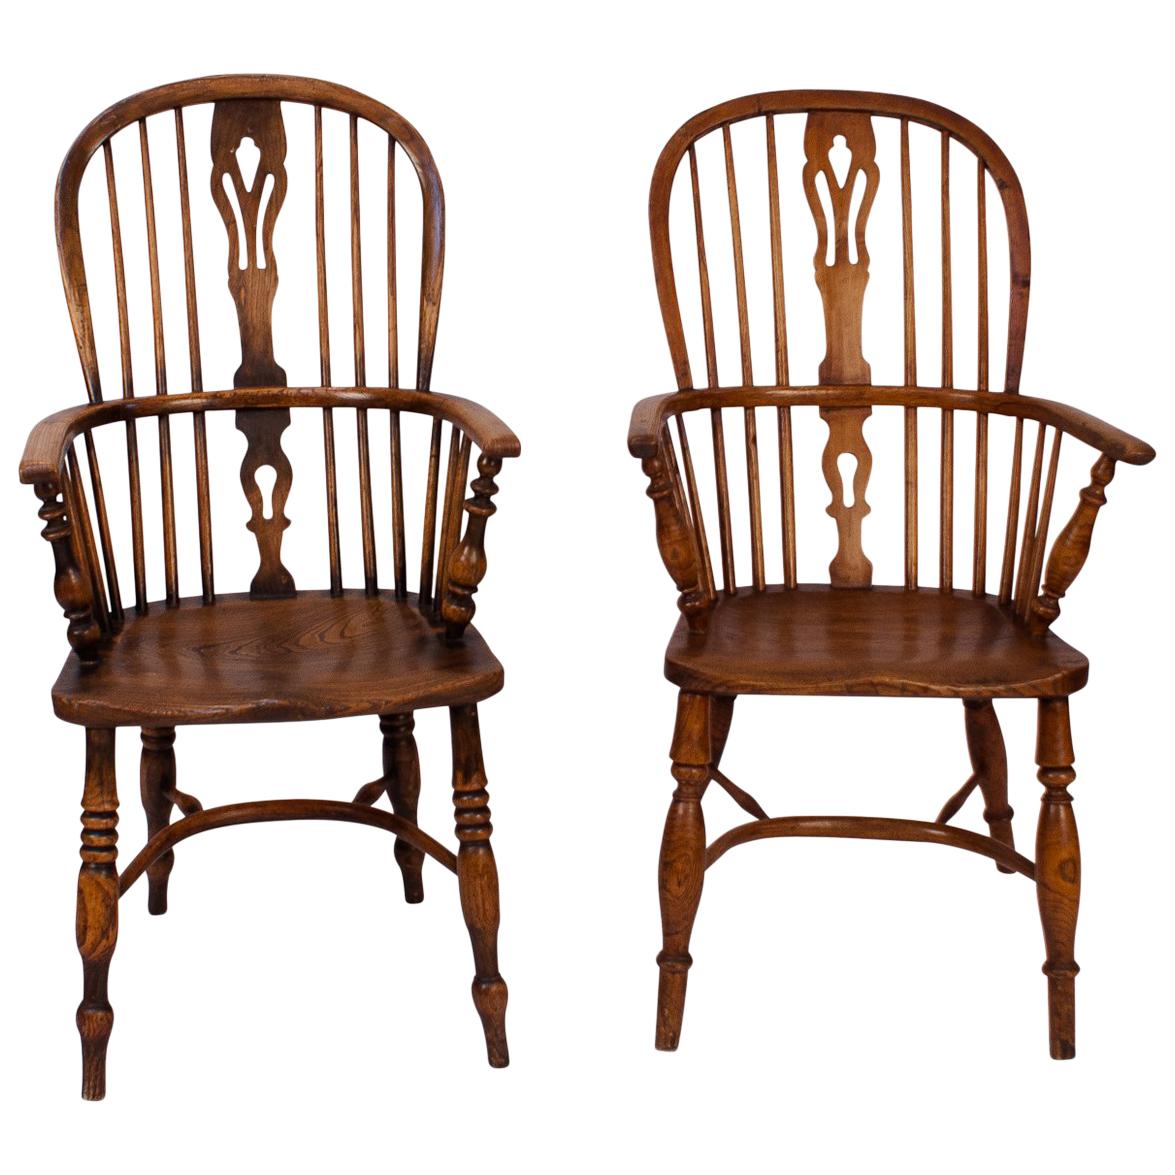 Assembled Pair of Windsor Armchairs, England, circa 1840